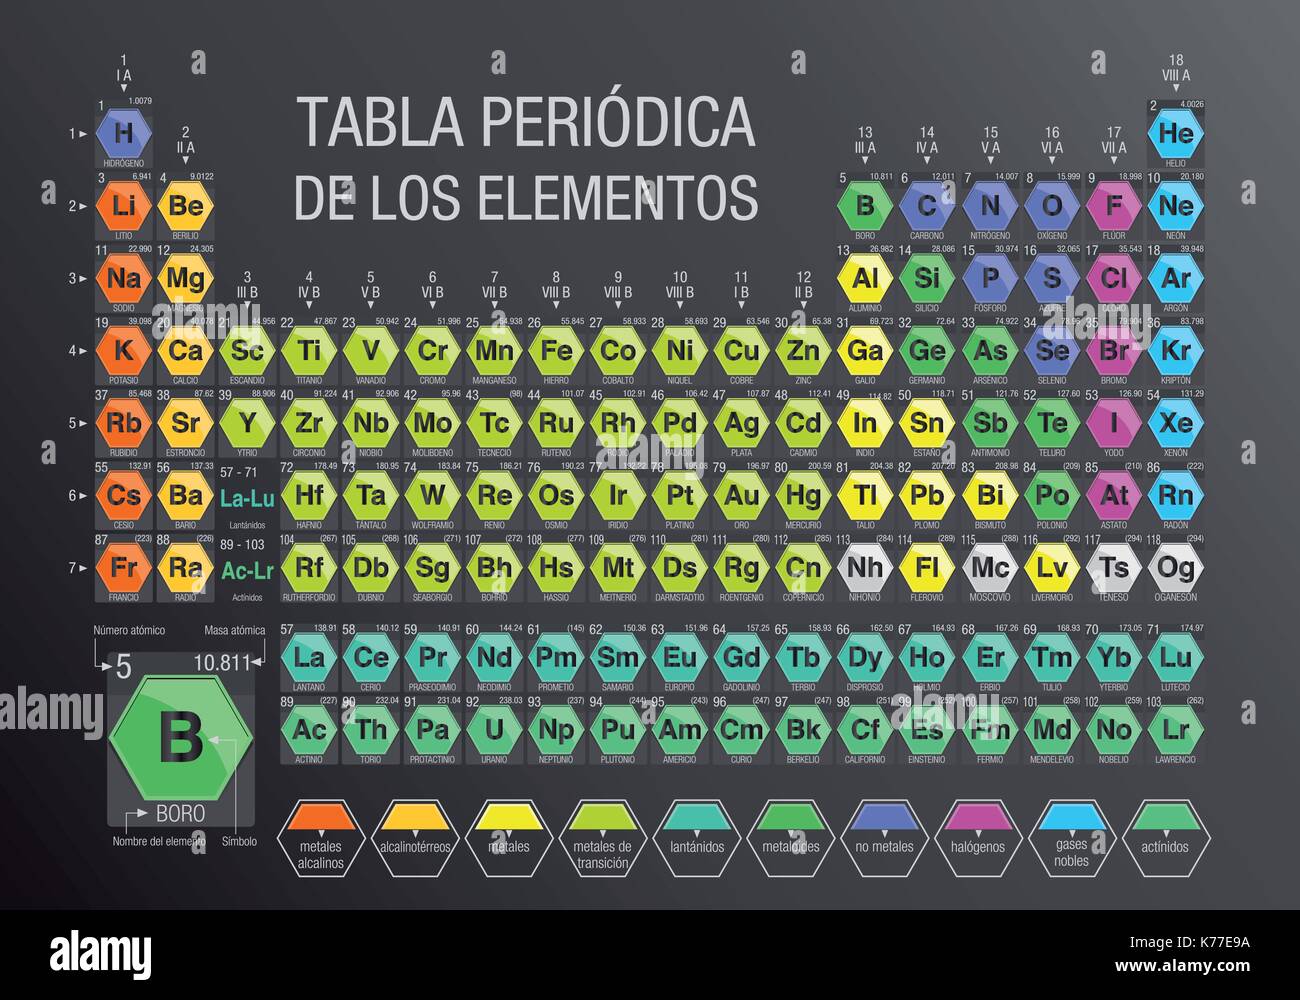 TABLA PERIODICA DE LOS ELEMENTOS -Periodic Table of Elements in Spanish language- formed by modules in the form of hexagons in gray background Stock Vector